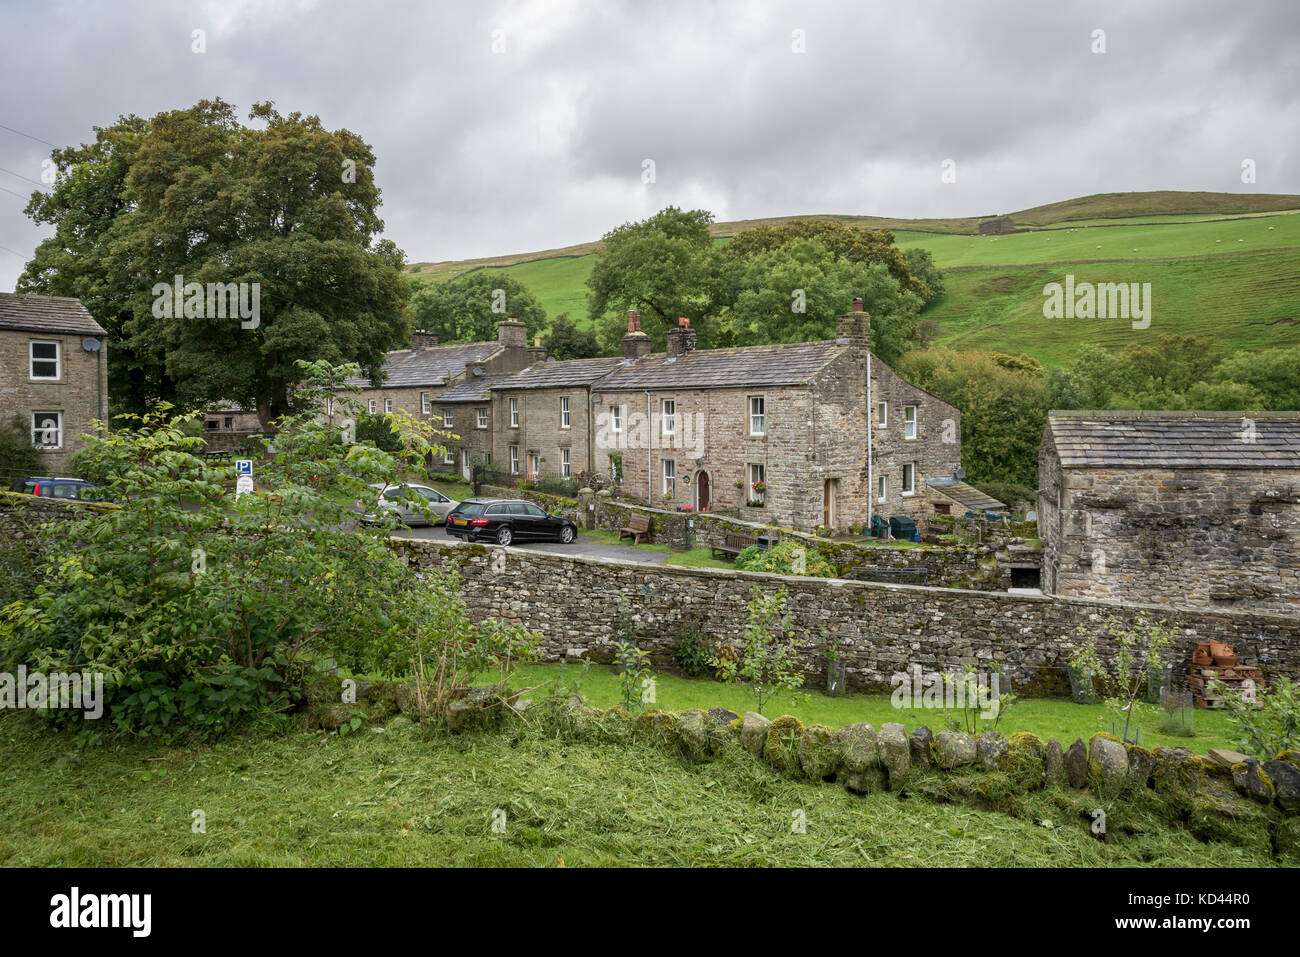 The remote village of Keld in Upper Swaledale, North Yorkshire, England. Stock Photo